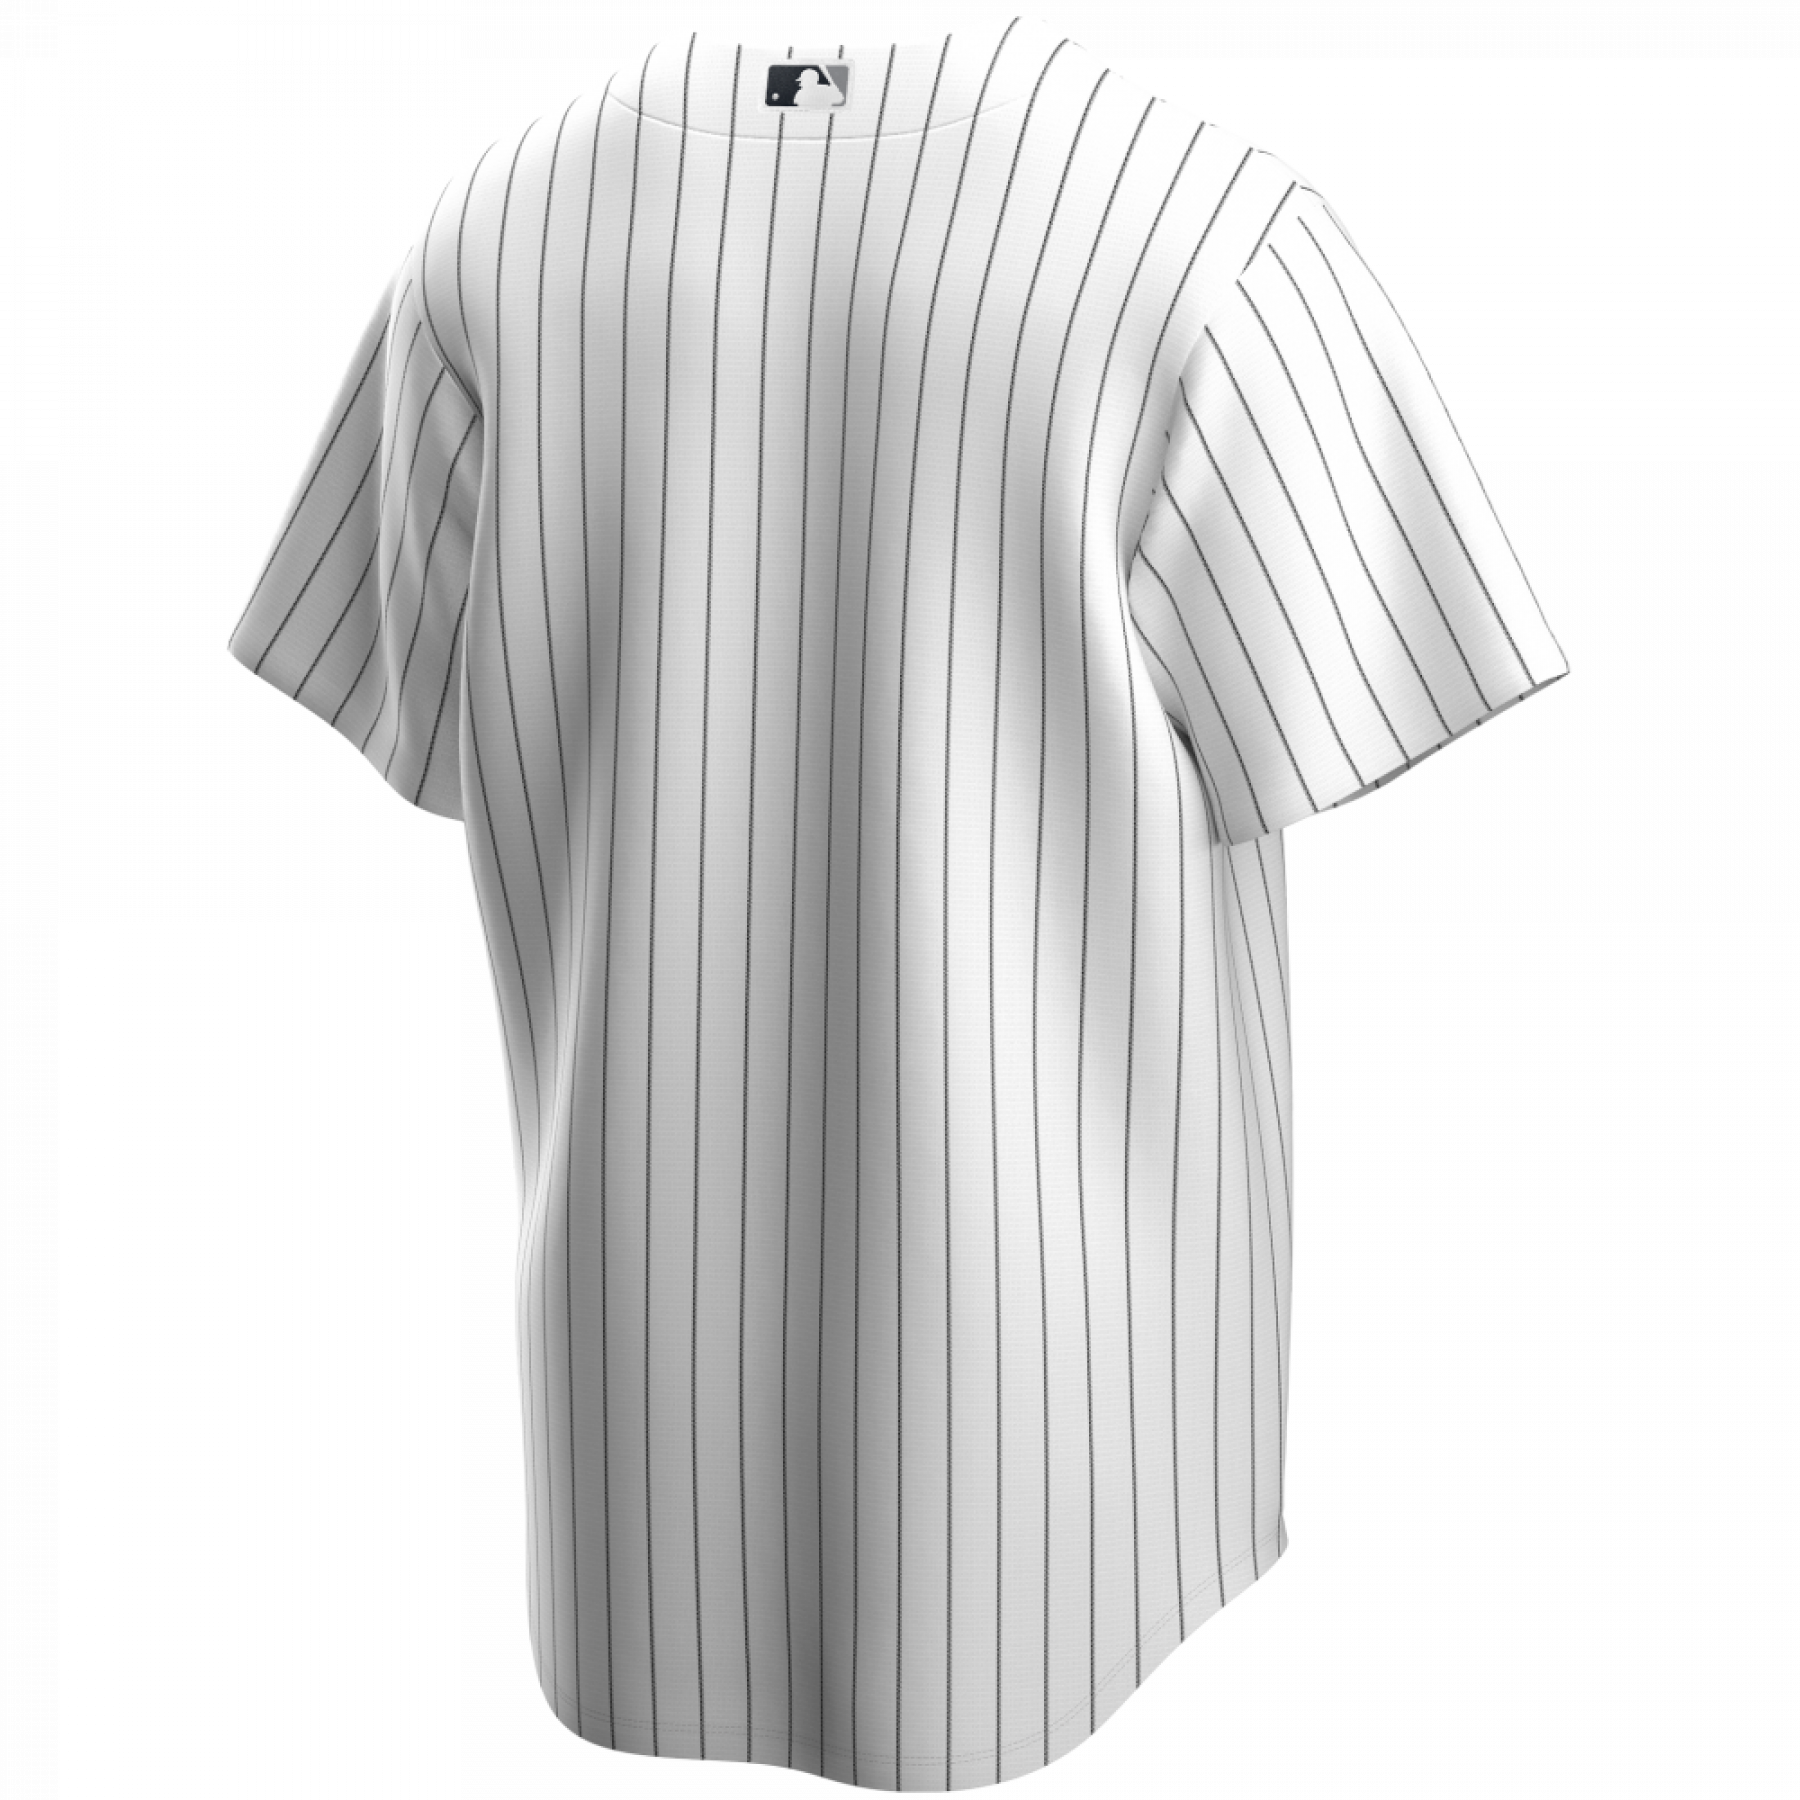 Official replica home jersey Chicago White Sox